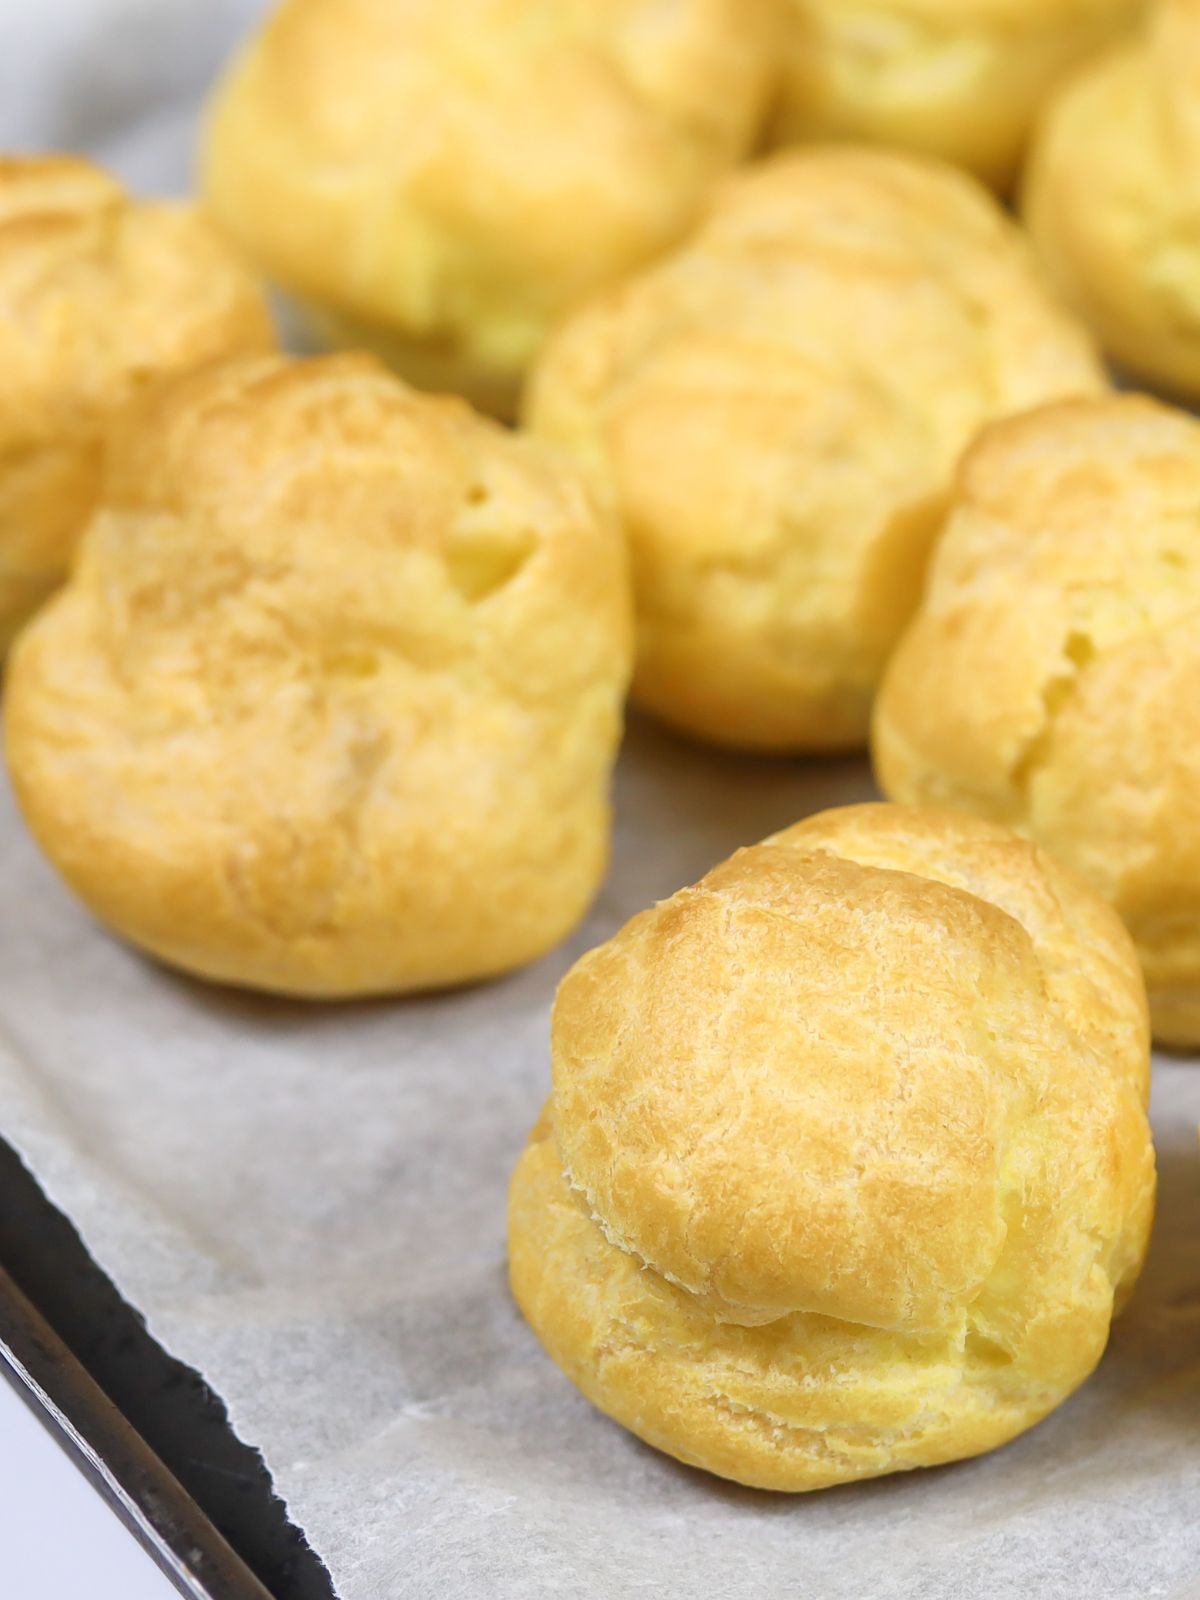 Baked cream puffs on tray with parchment paper.